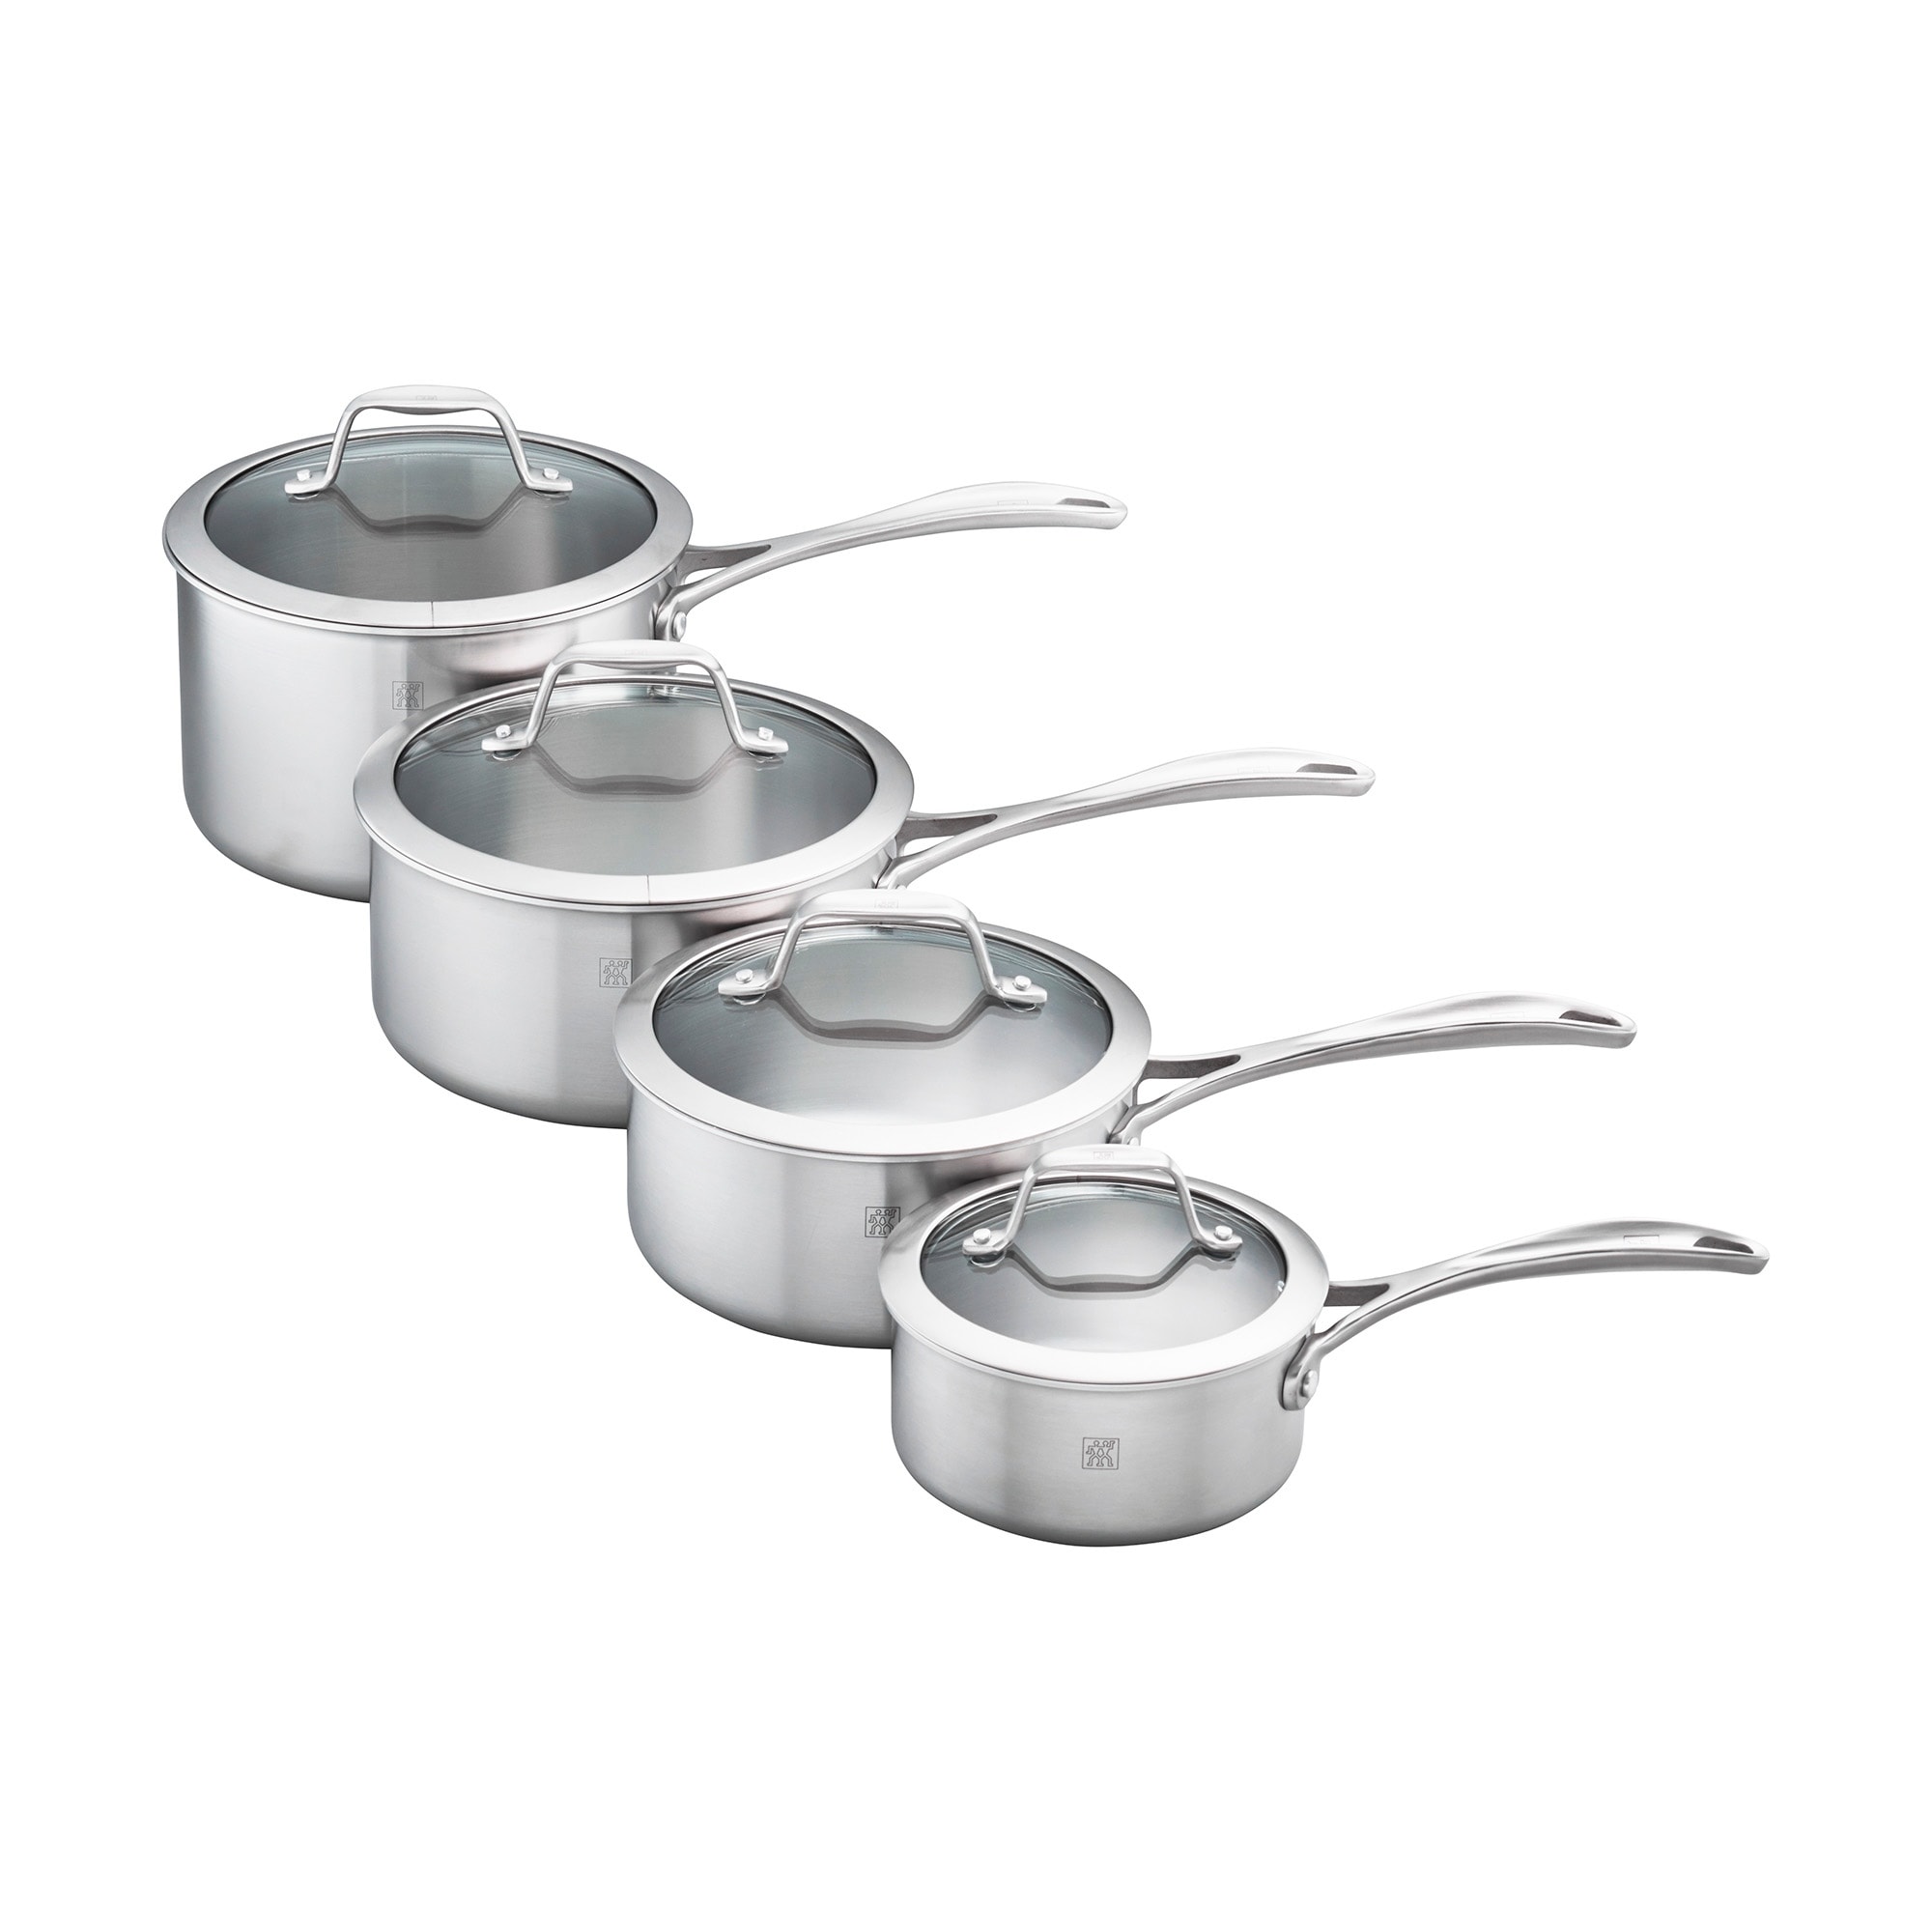 https://ak1.ostkcdn.com/images/products/is/images/direct/8207d91051972f6c72c909220a45cd82d4840a72/ZWILLING-Spirit-3-ply-Stainless-Steel-Saucepan.jpg